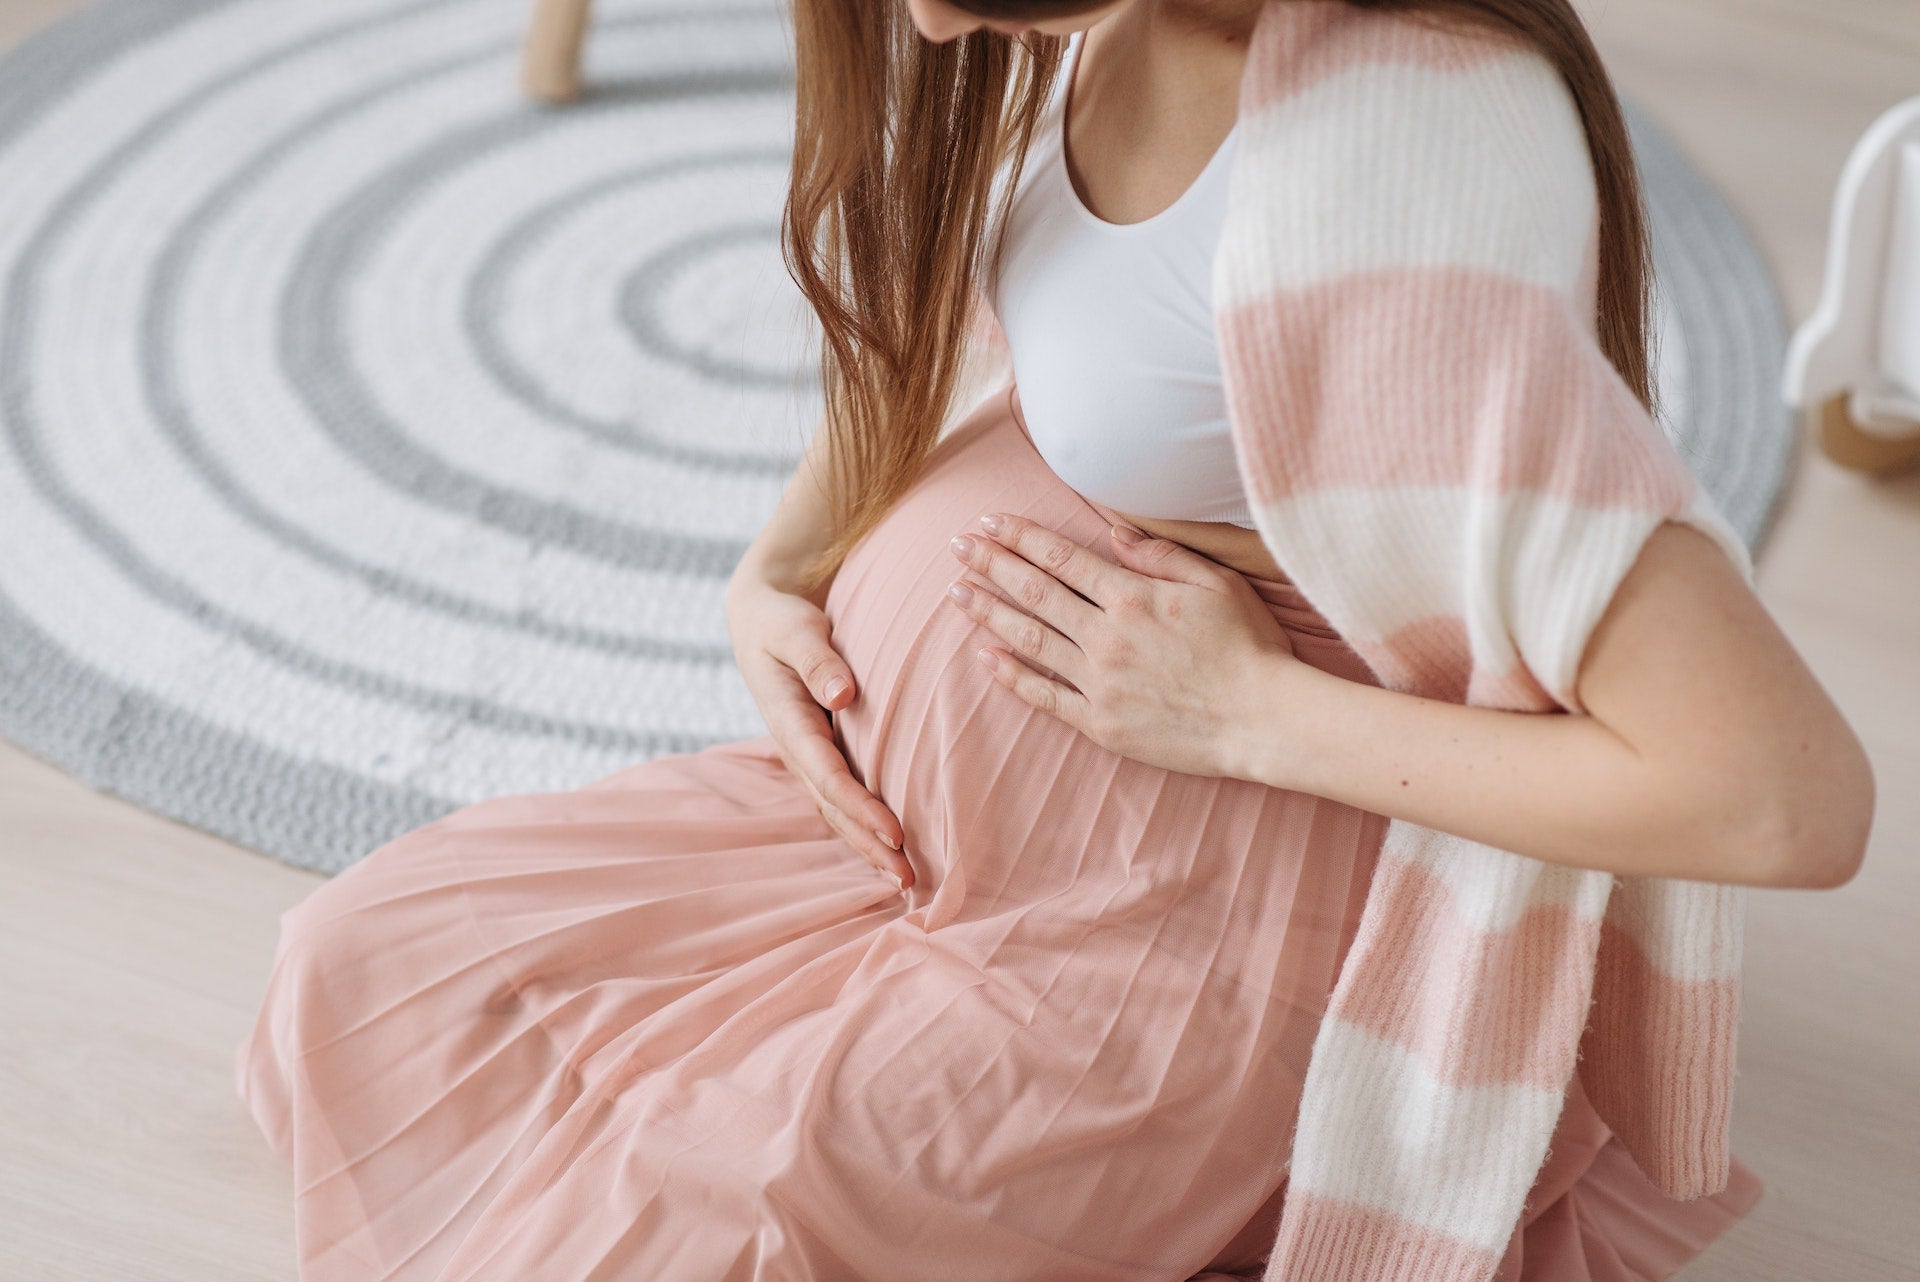 Pregnant woman sits on floor and holds her belly